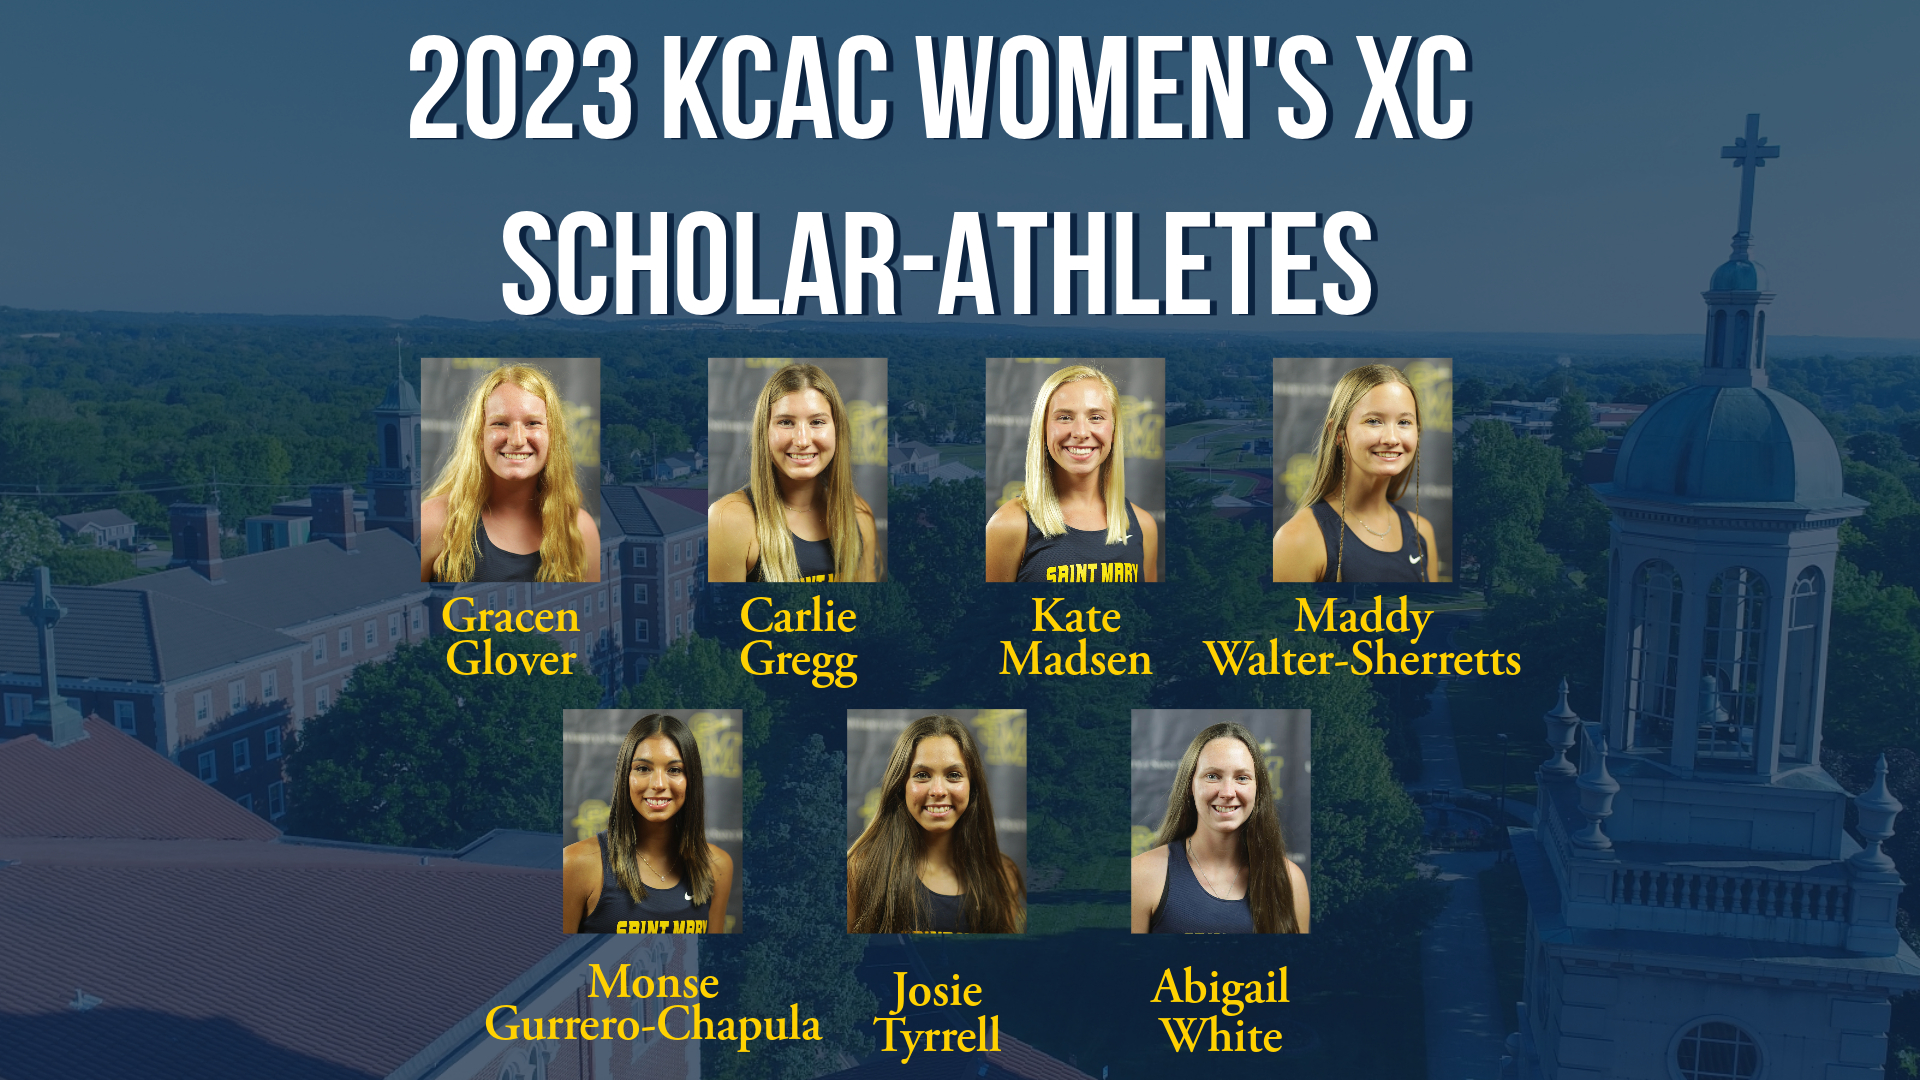 Seven Women's Cross-Country Runners Named 2023 KCAC Scholar-Athletes